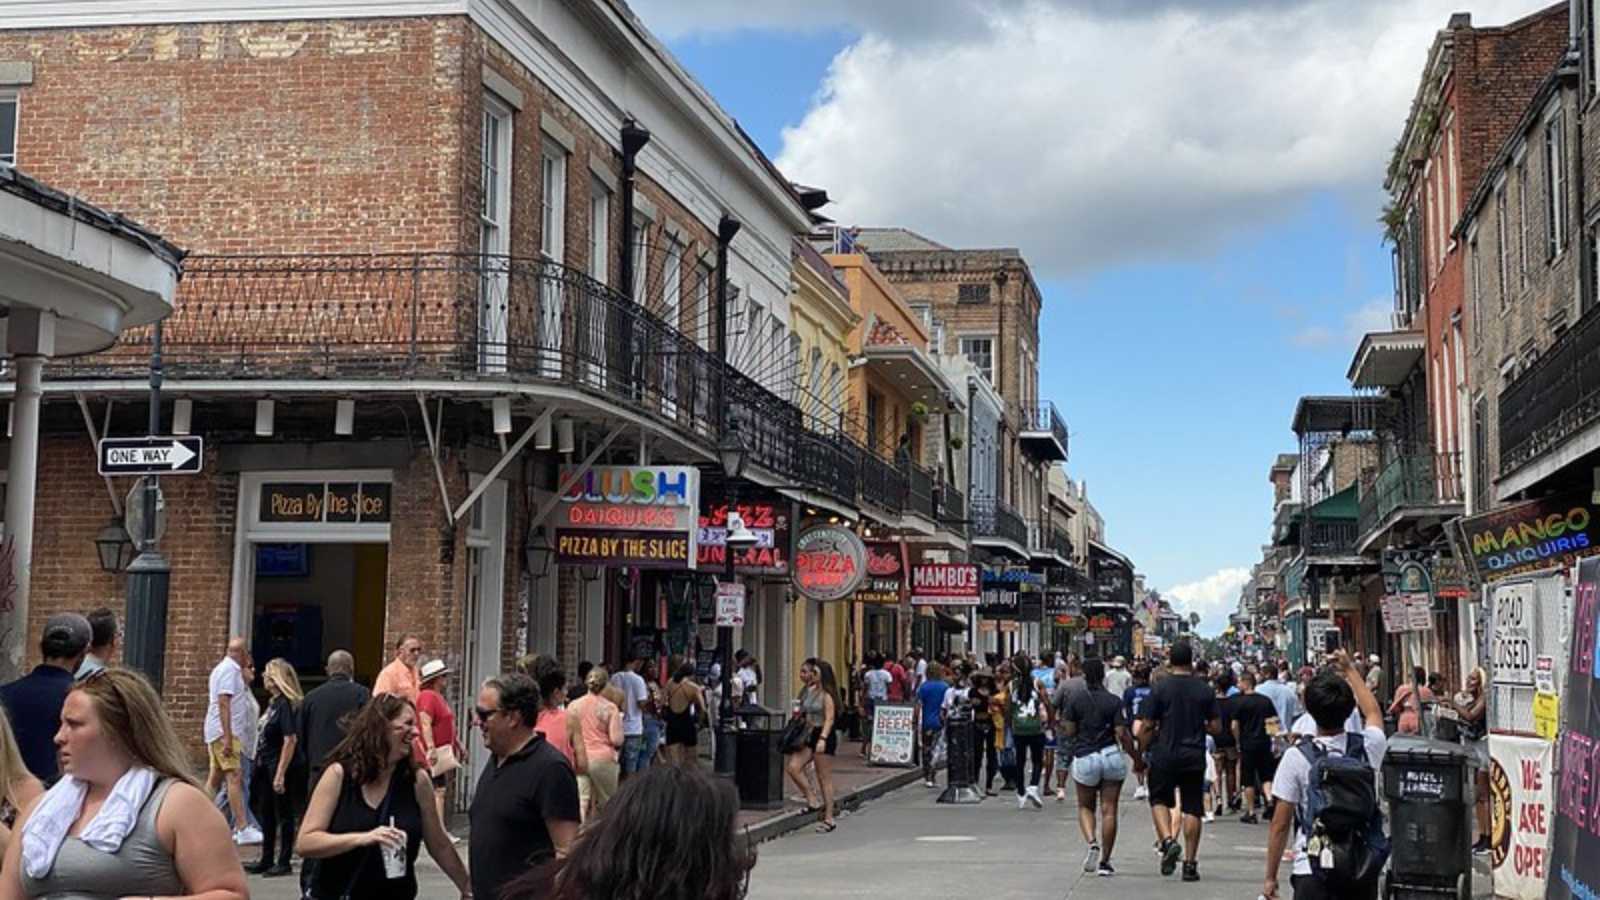 <p><span>Bourbon Street is known for its rowdy, touristy vibe that often overshadows the rich culture of New Orleans. You might want to <a href="https://ashandpri.com/breathtaking-trails-you-have-to-try-in-americas-national-parks" rel="noopener">explore elsewhere</a> if you're looking for genuine local flavor.</span></p>